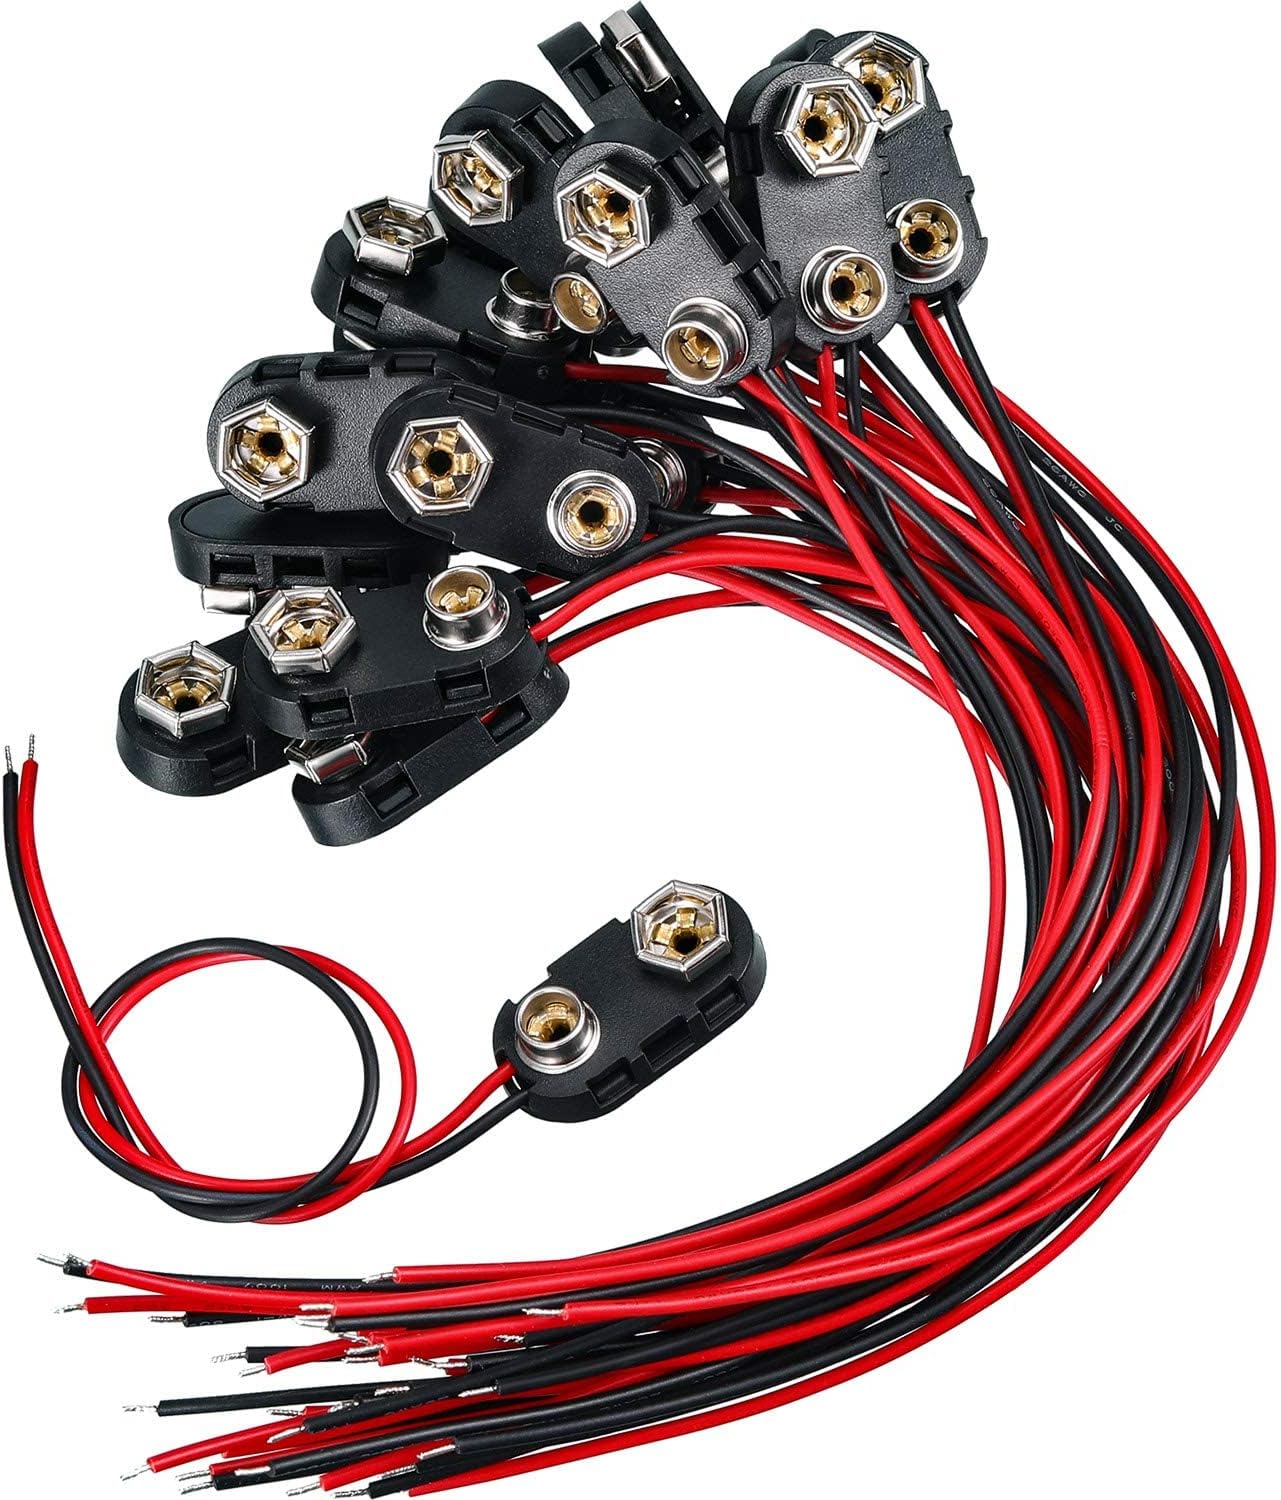 120 Pack 9v Battery Clip Connector Bulk Long Cable Connection Hard Shell Black Red Connector